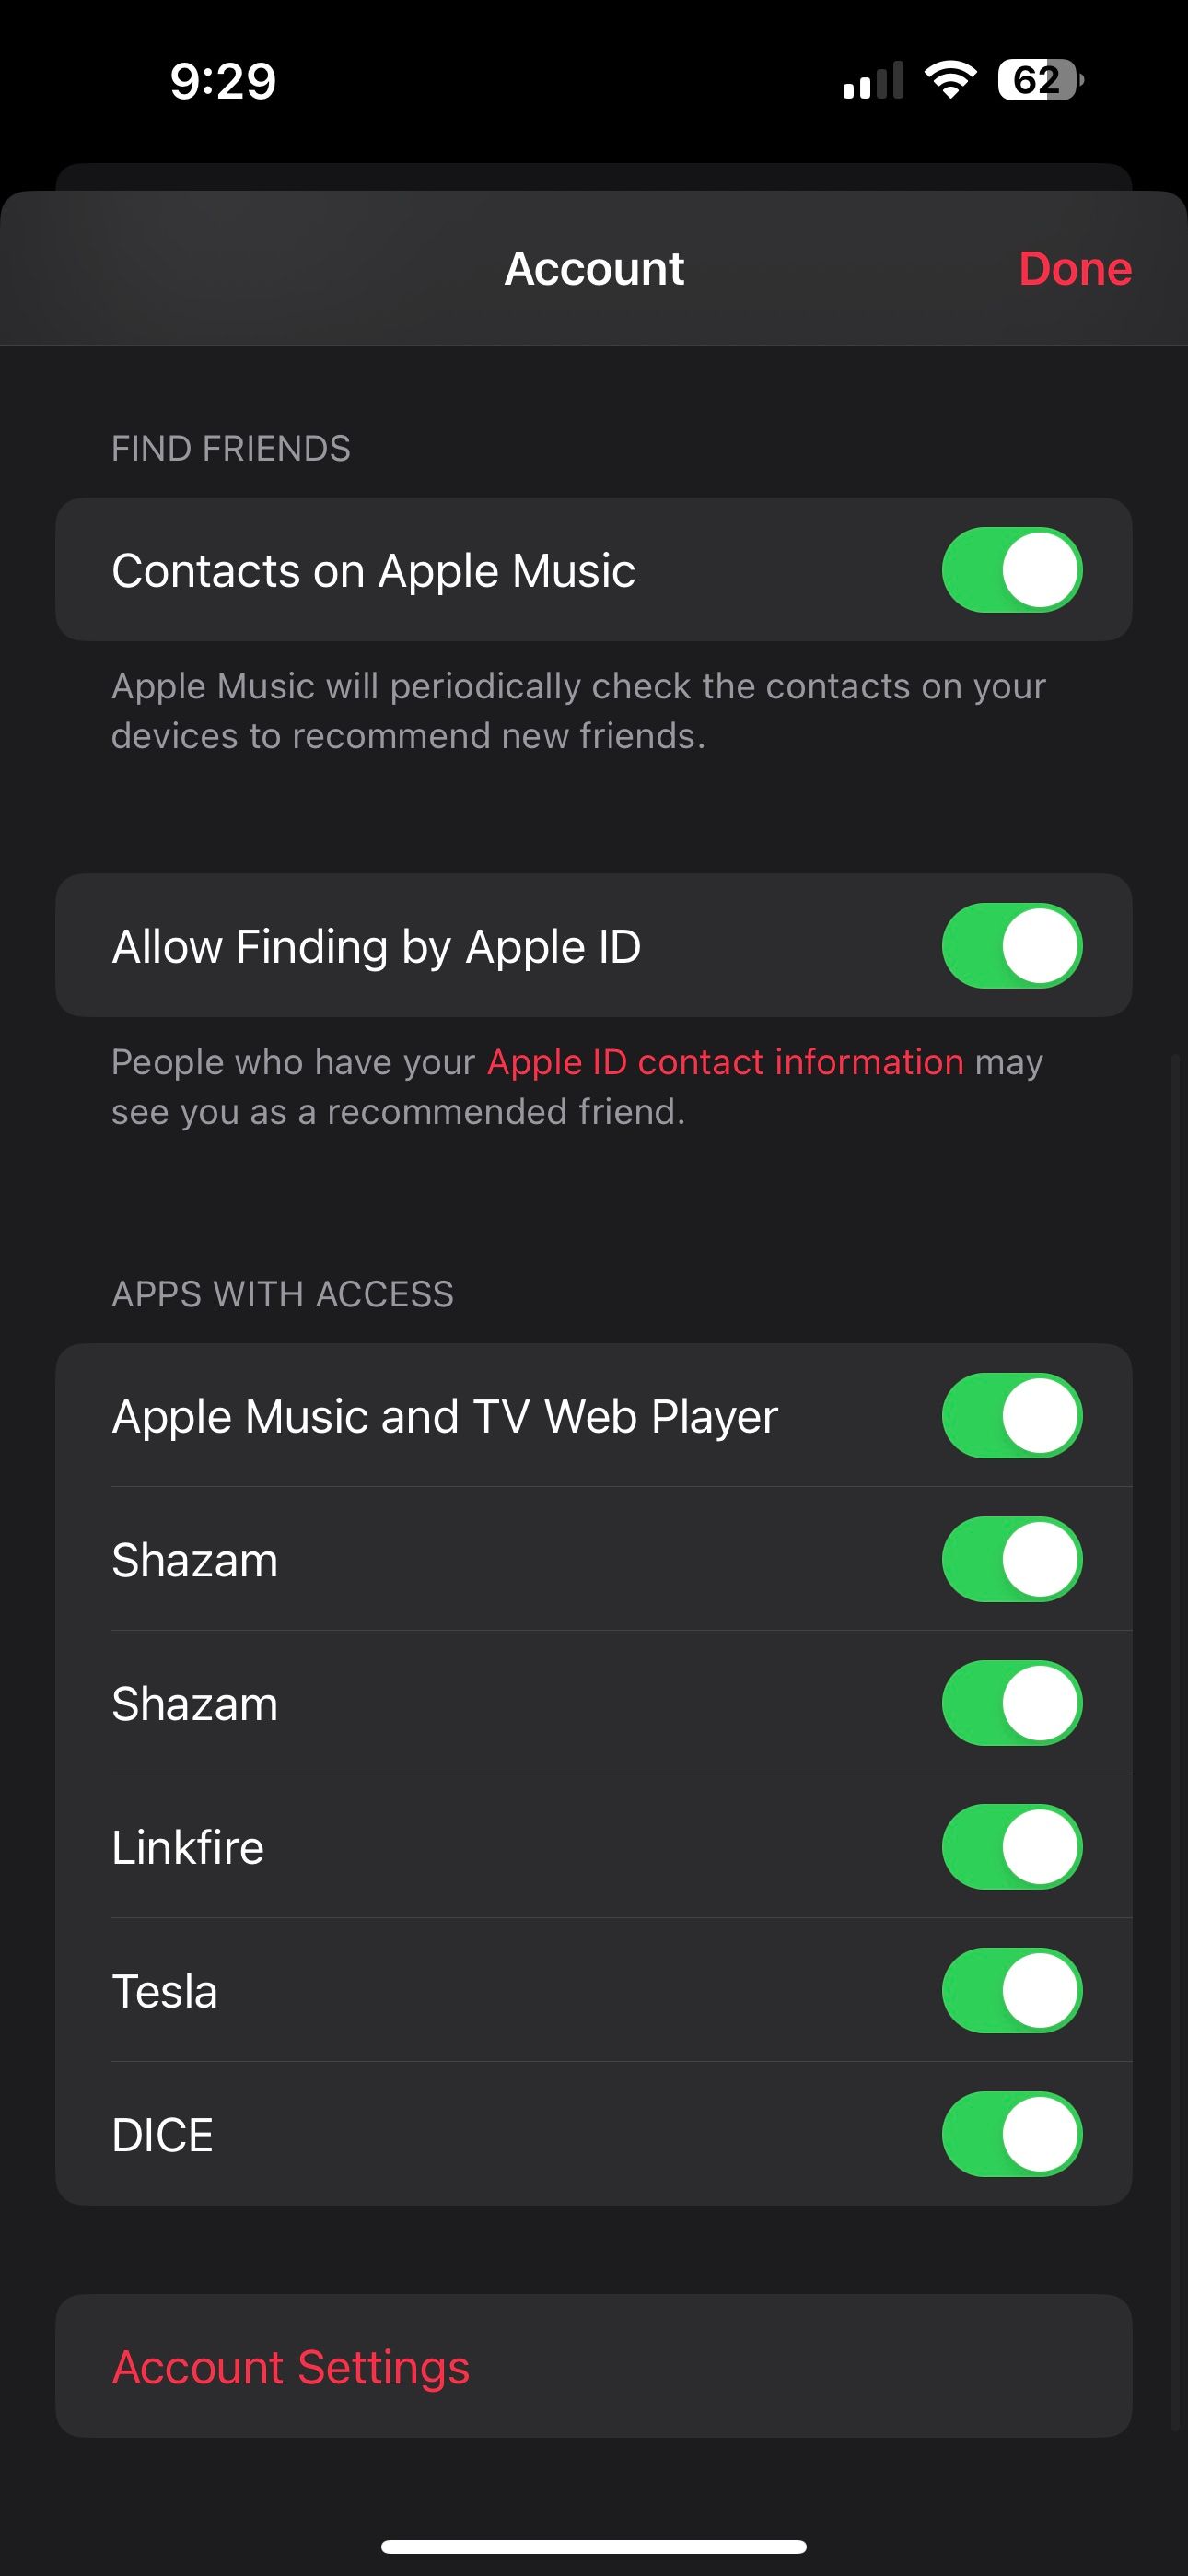 App access in Apple Music account settings